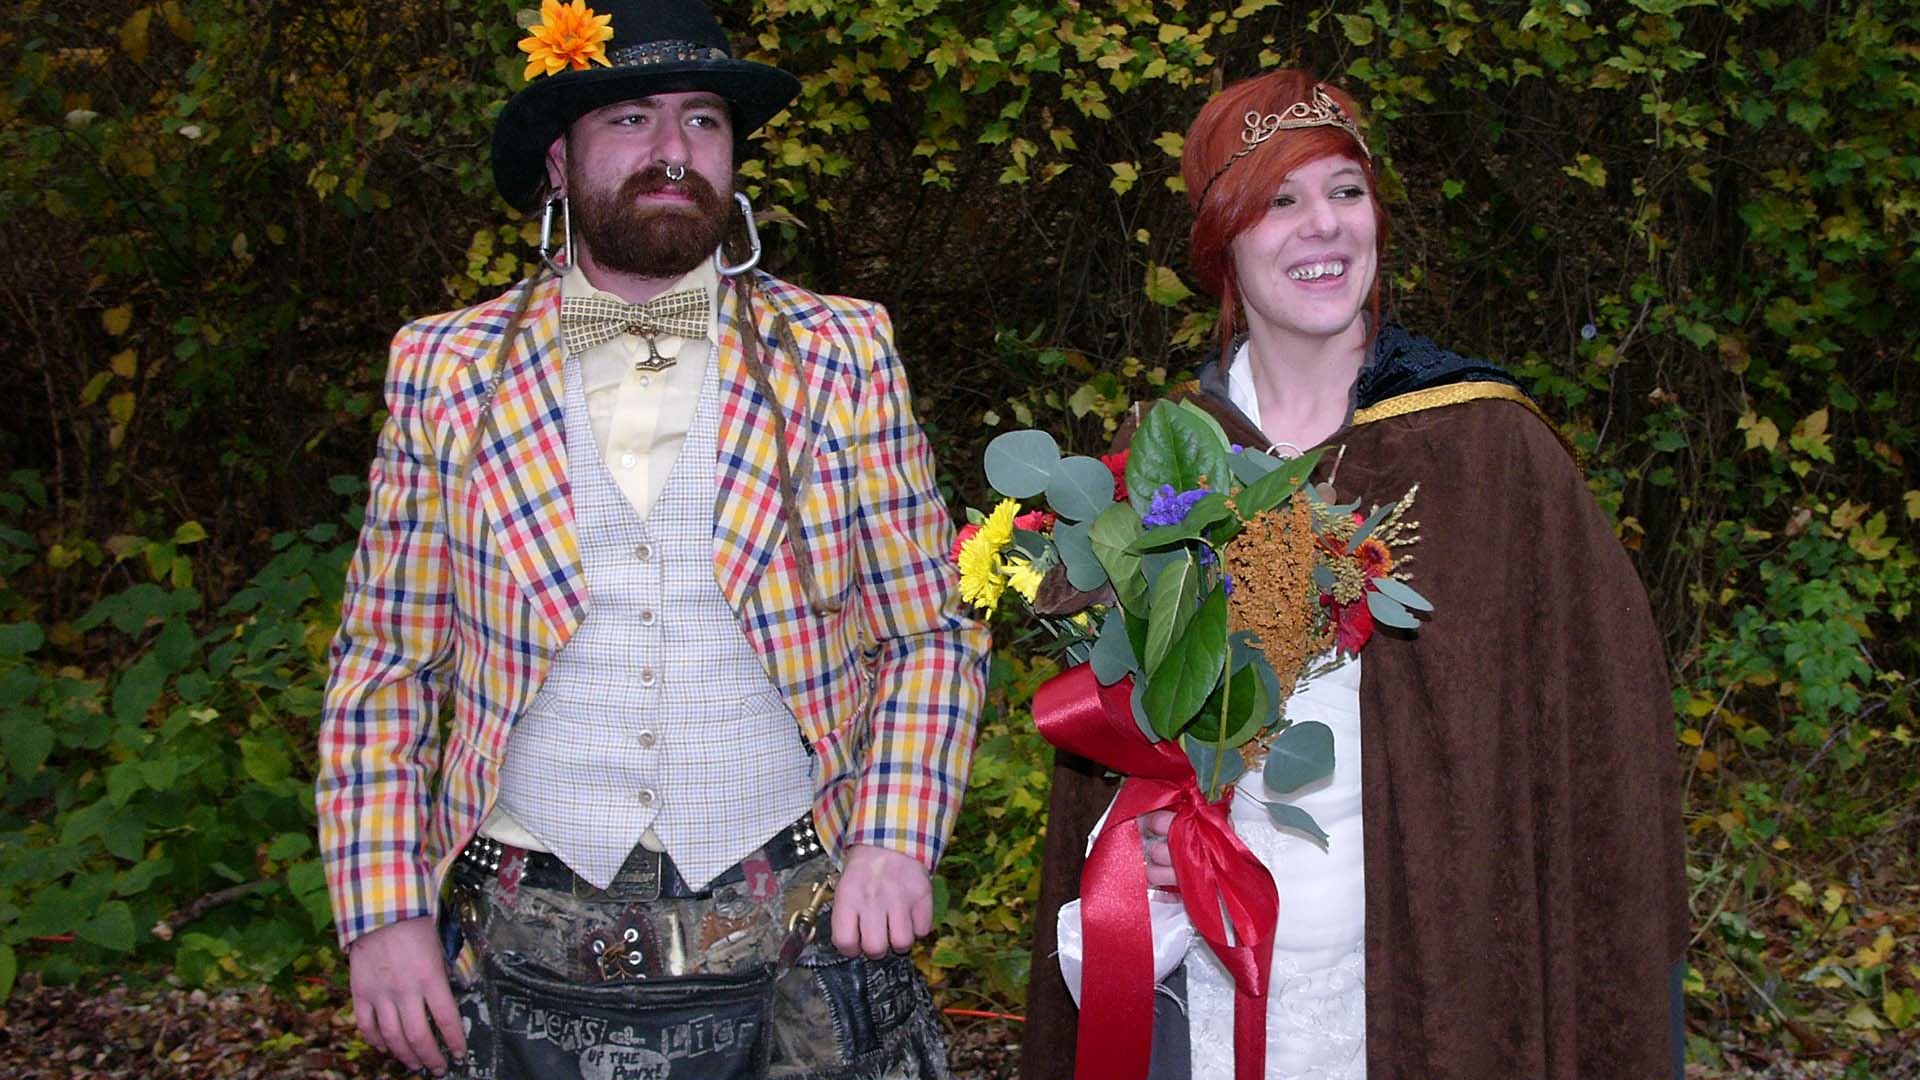 Brunette man and red-head woman dressed in outdated clothing and posing for a picture. The woman is holding flowers.